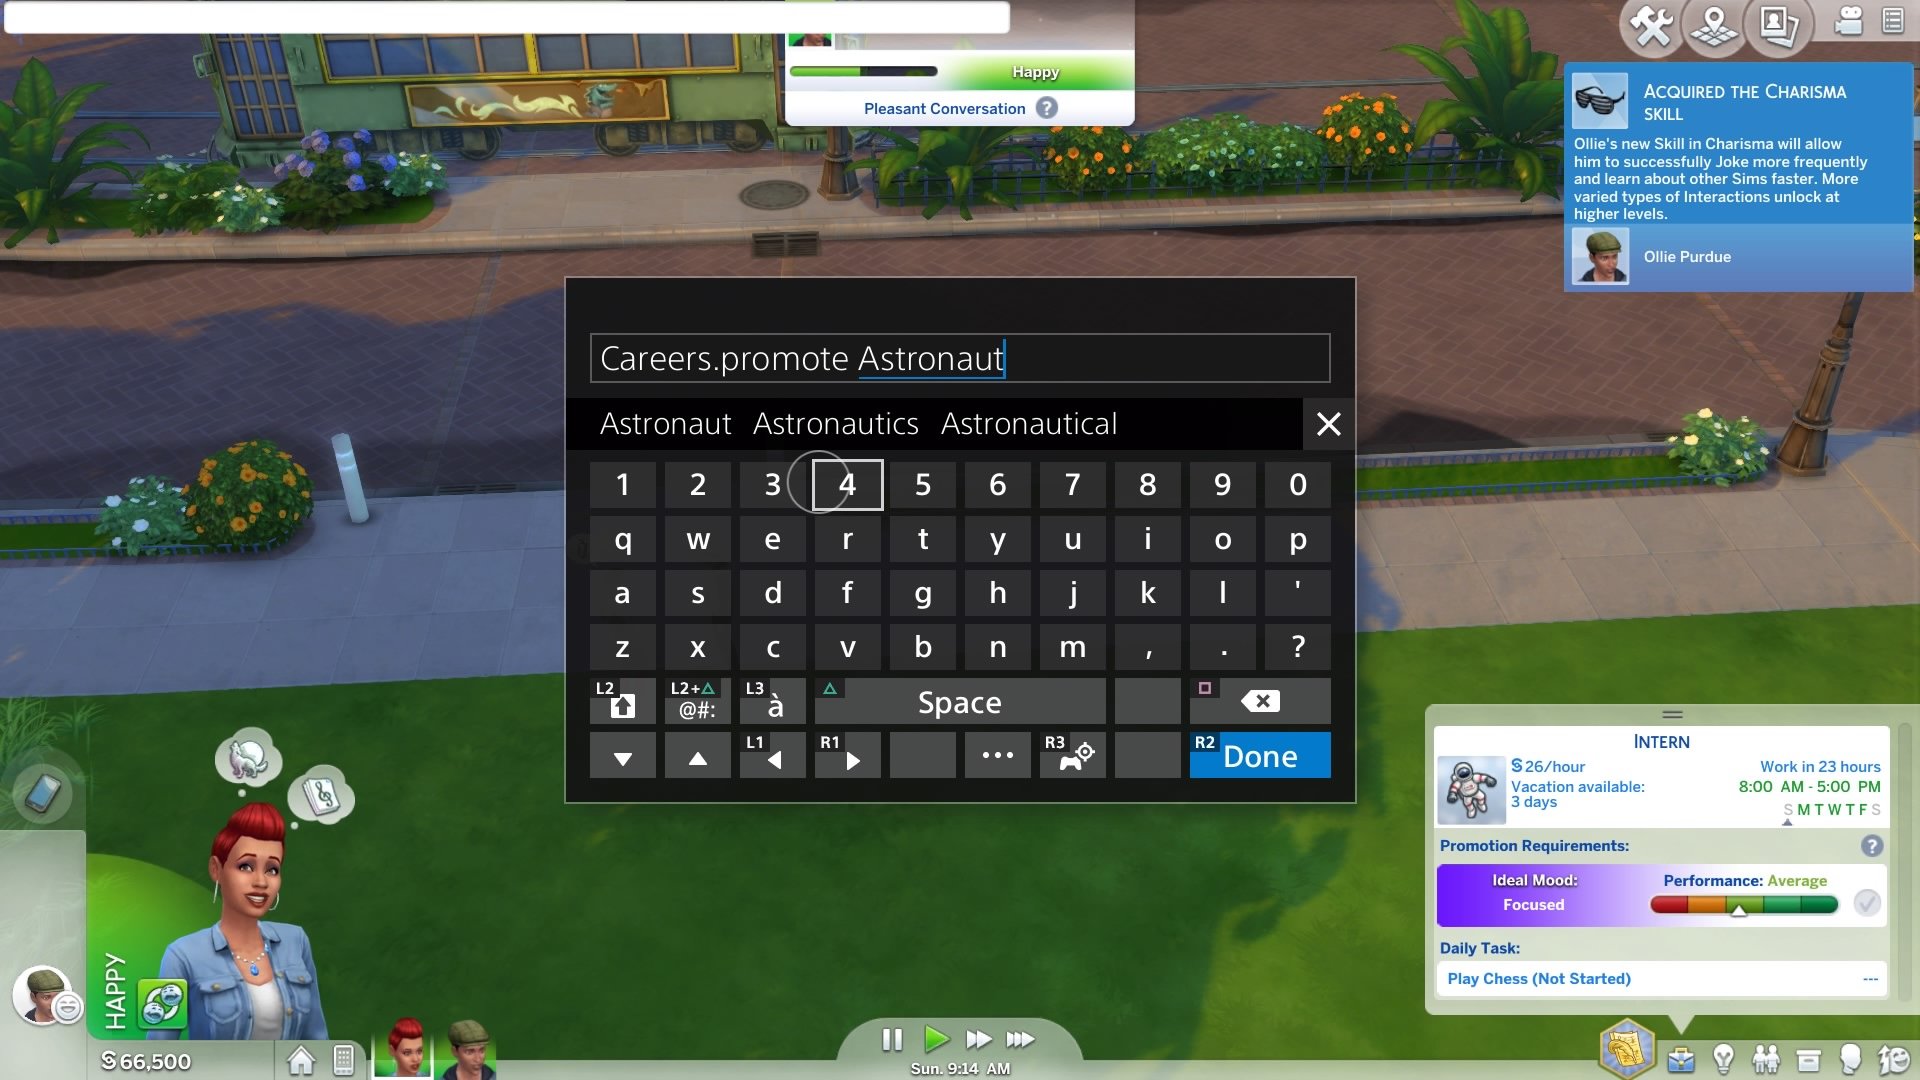 Using Cheats on The Sims 4 Xbox One / PS4